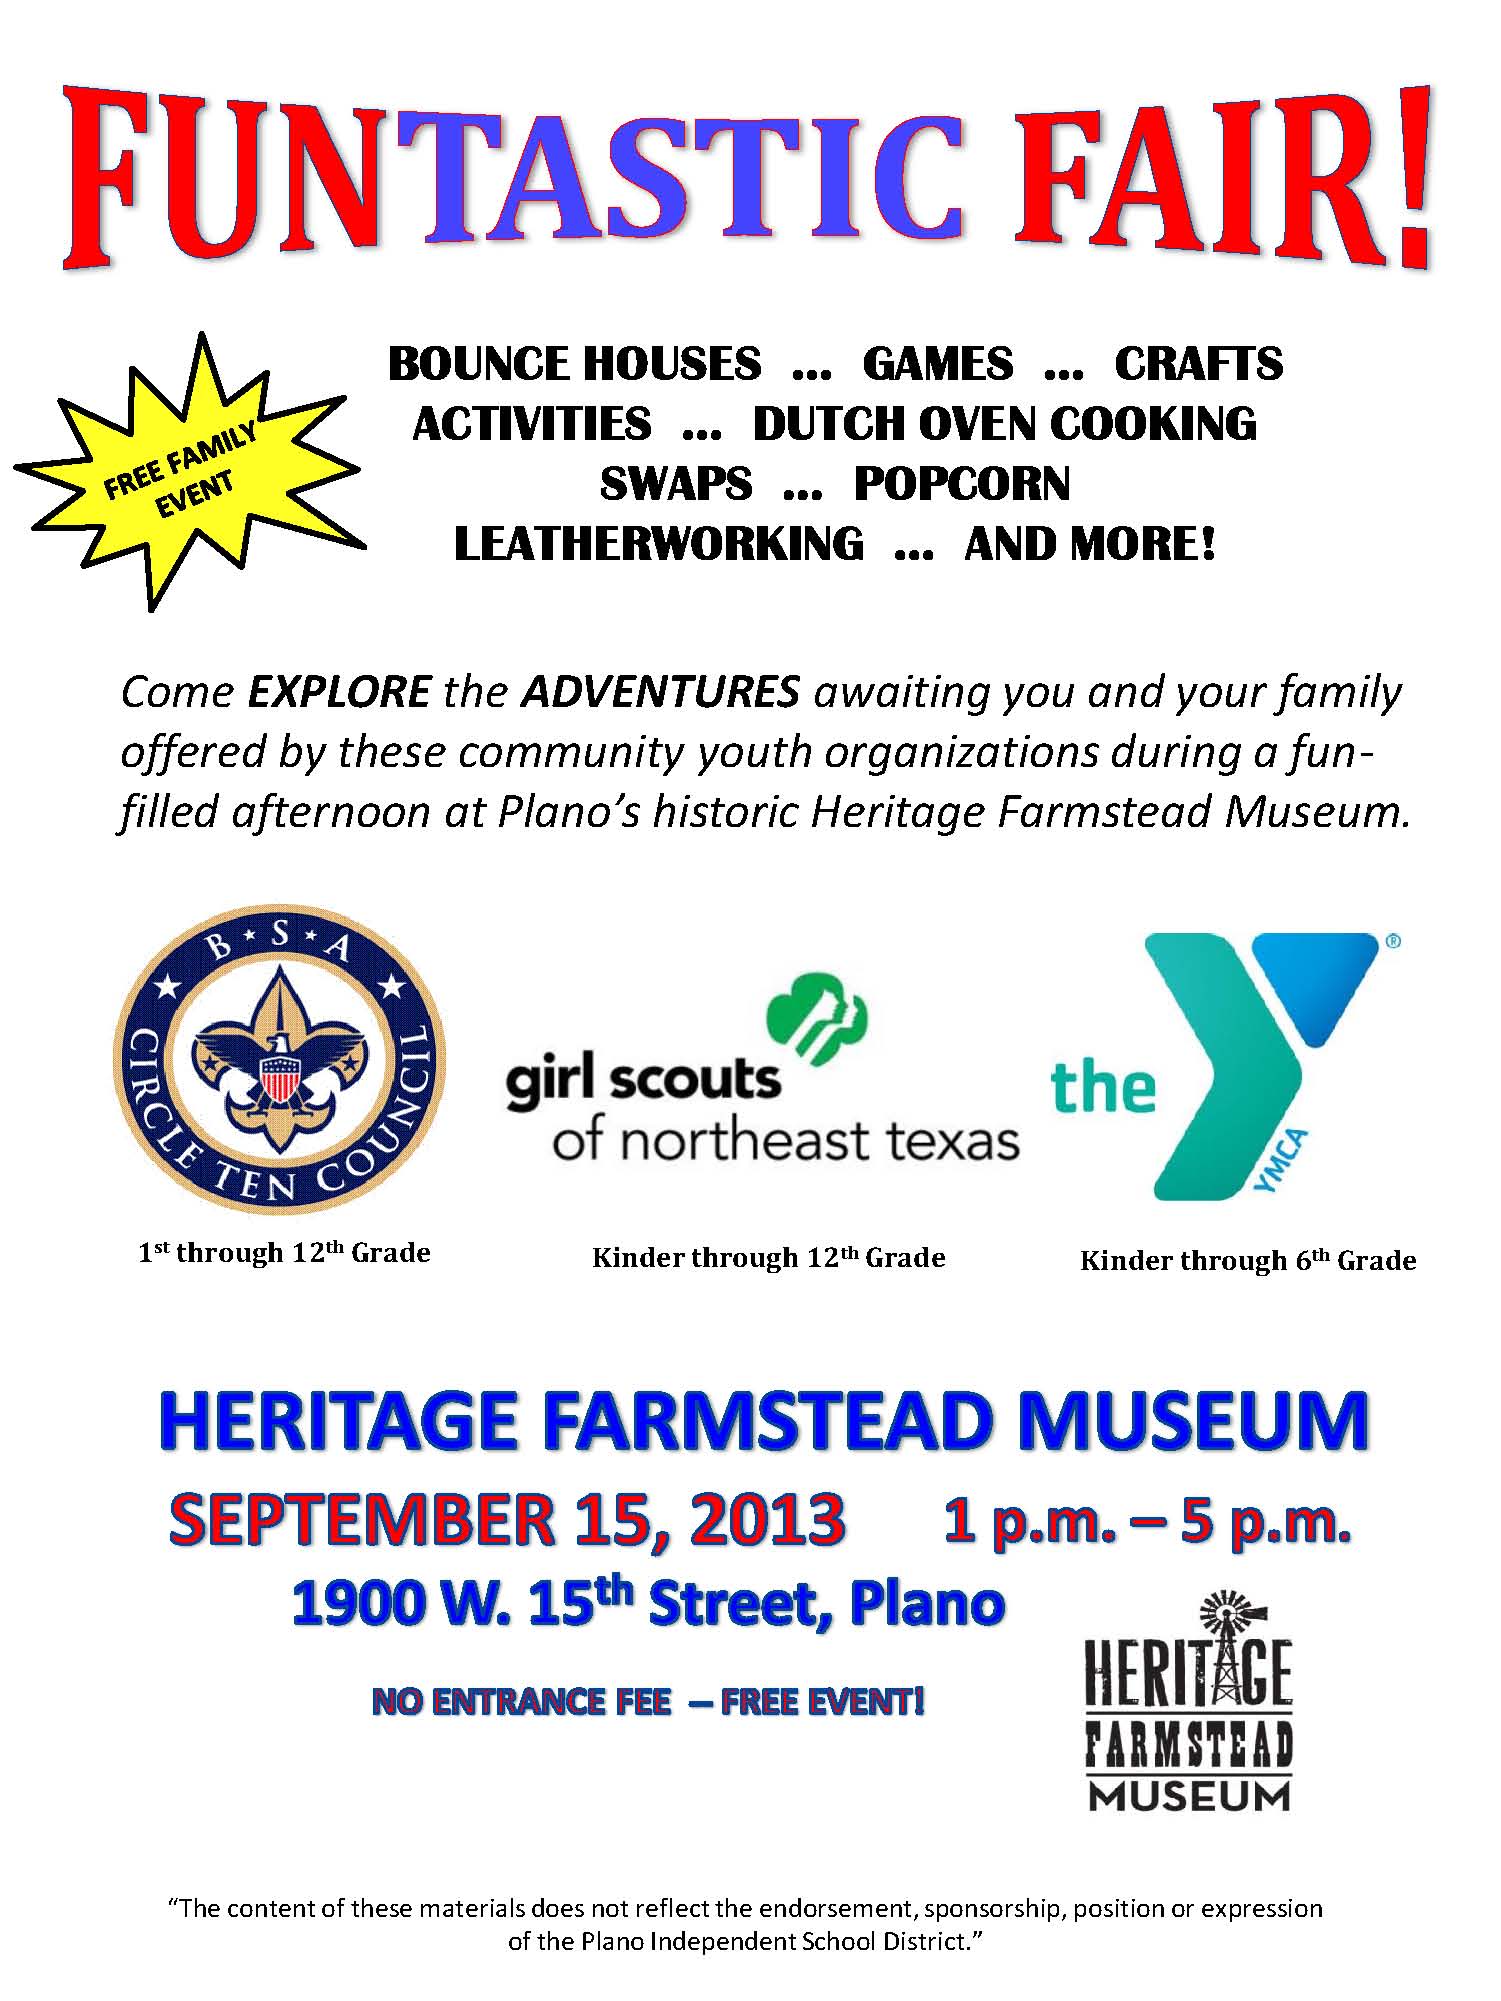 Funtastic Fair at Heritage Farmstead Museum with Plano Y, Scouts